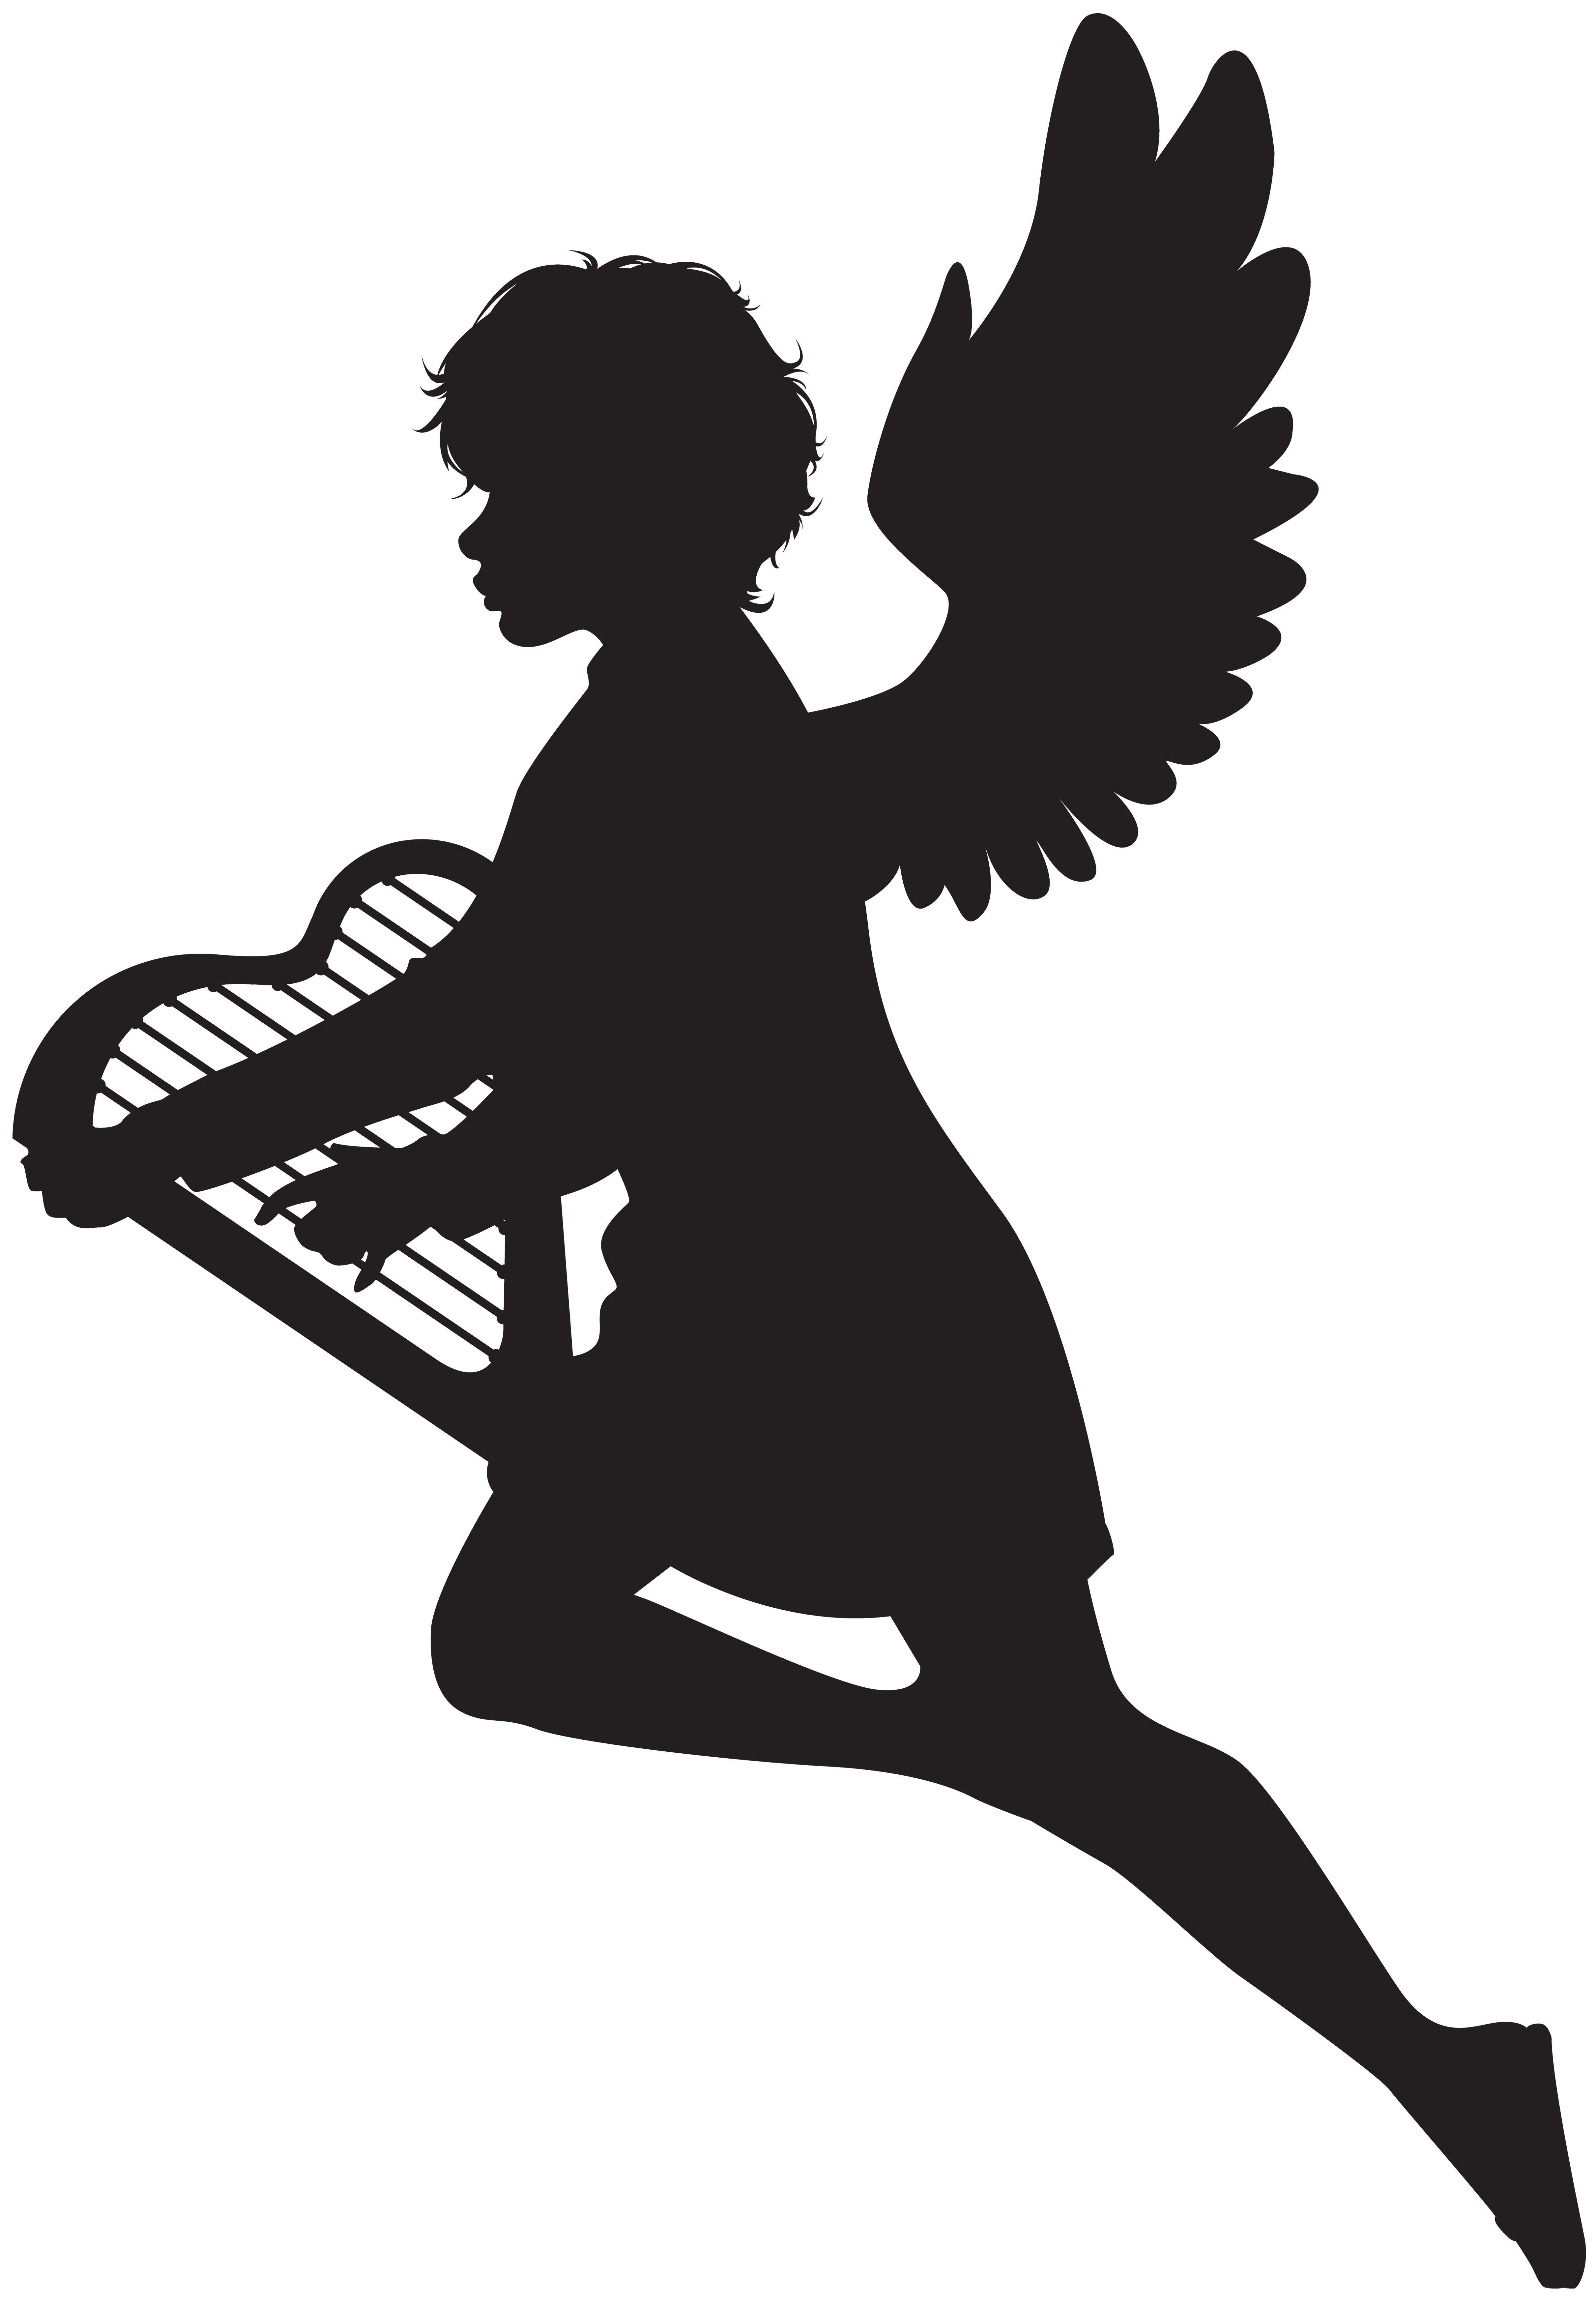 Silhouette Clip Art Angel With Harp PNG Image Png.